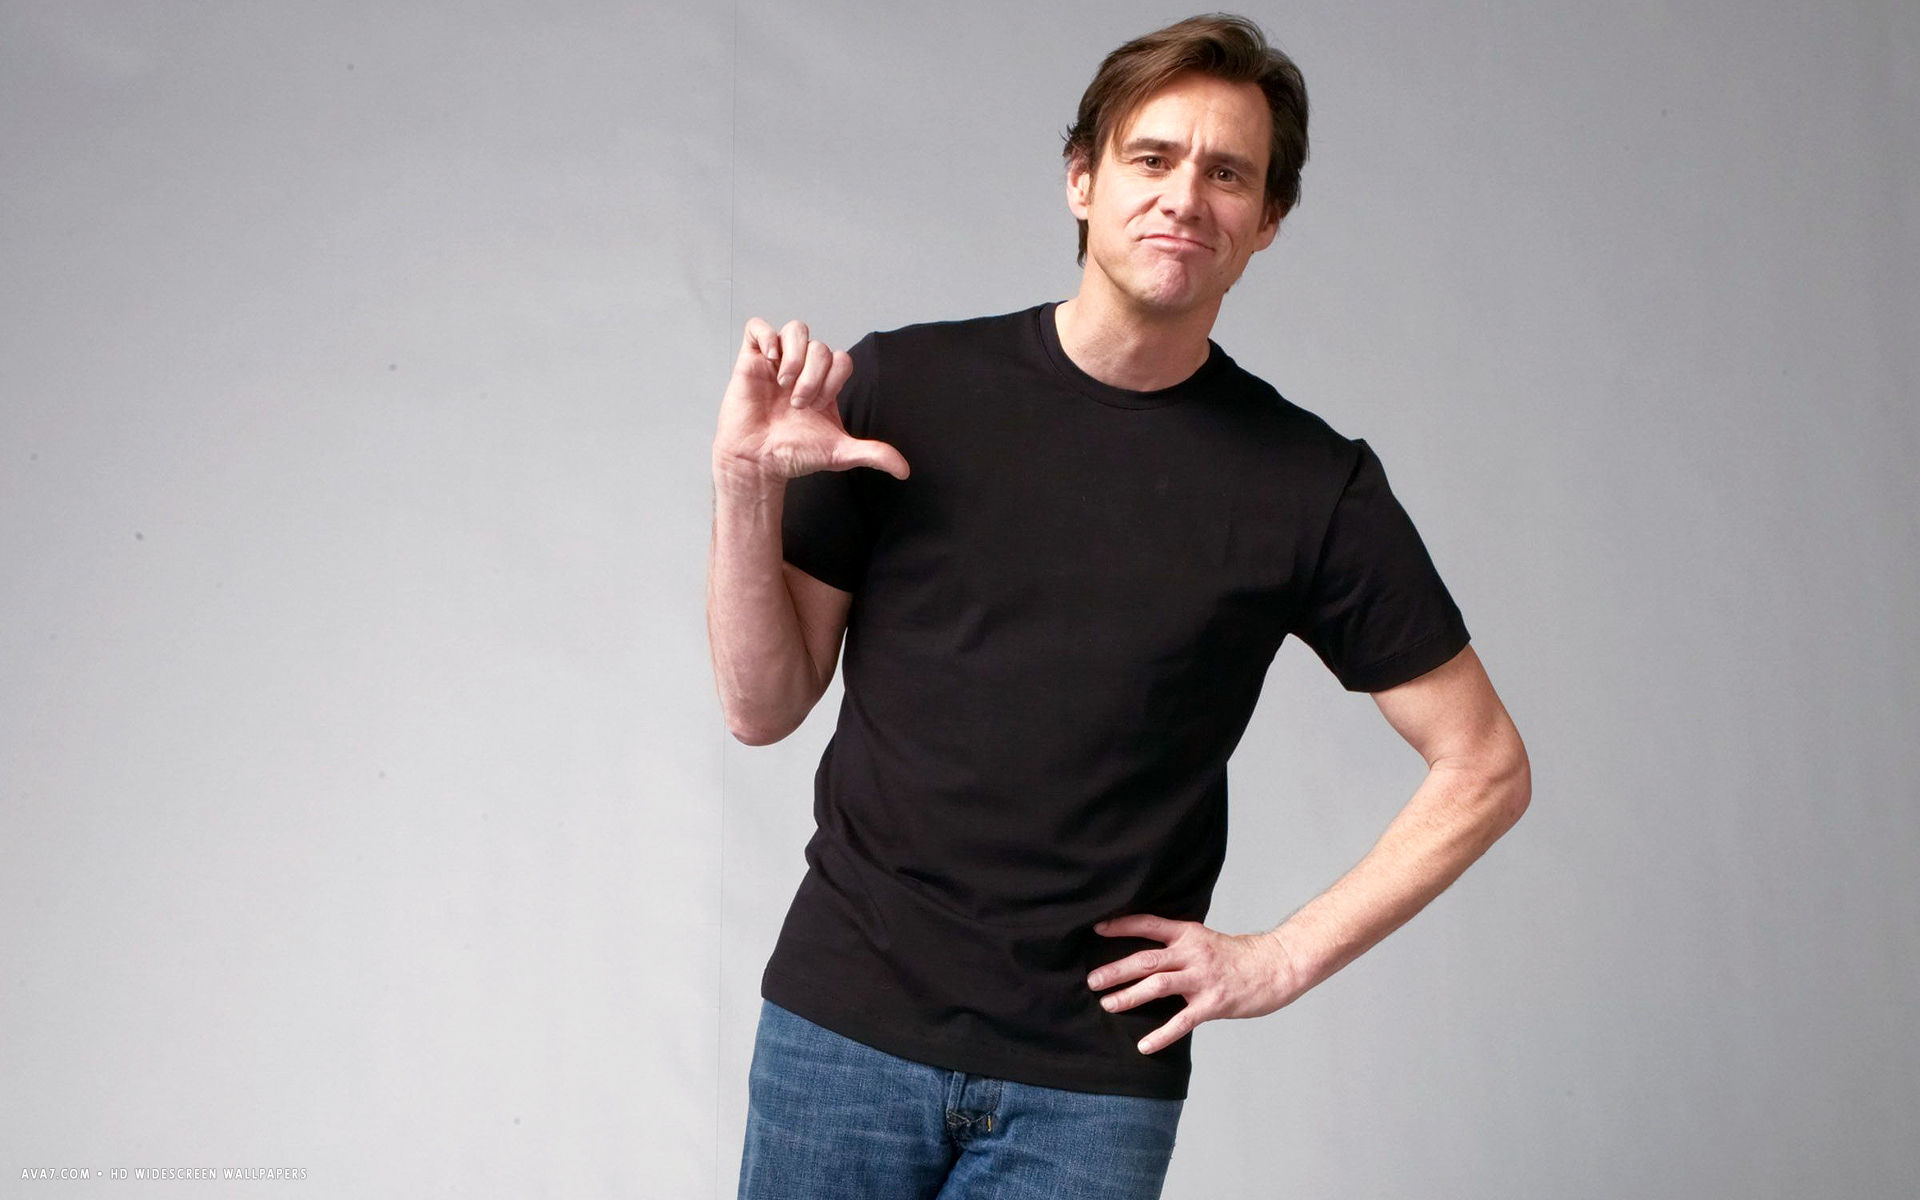 Jim Carrey Wallpaper And Background Image